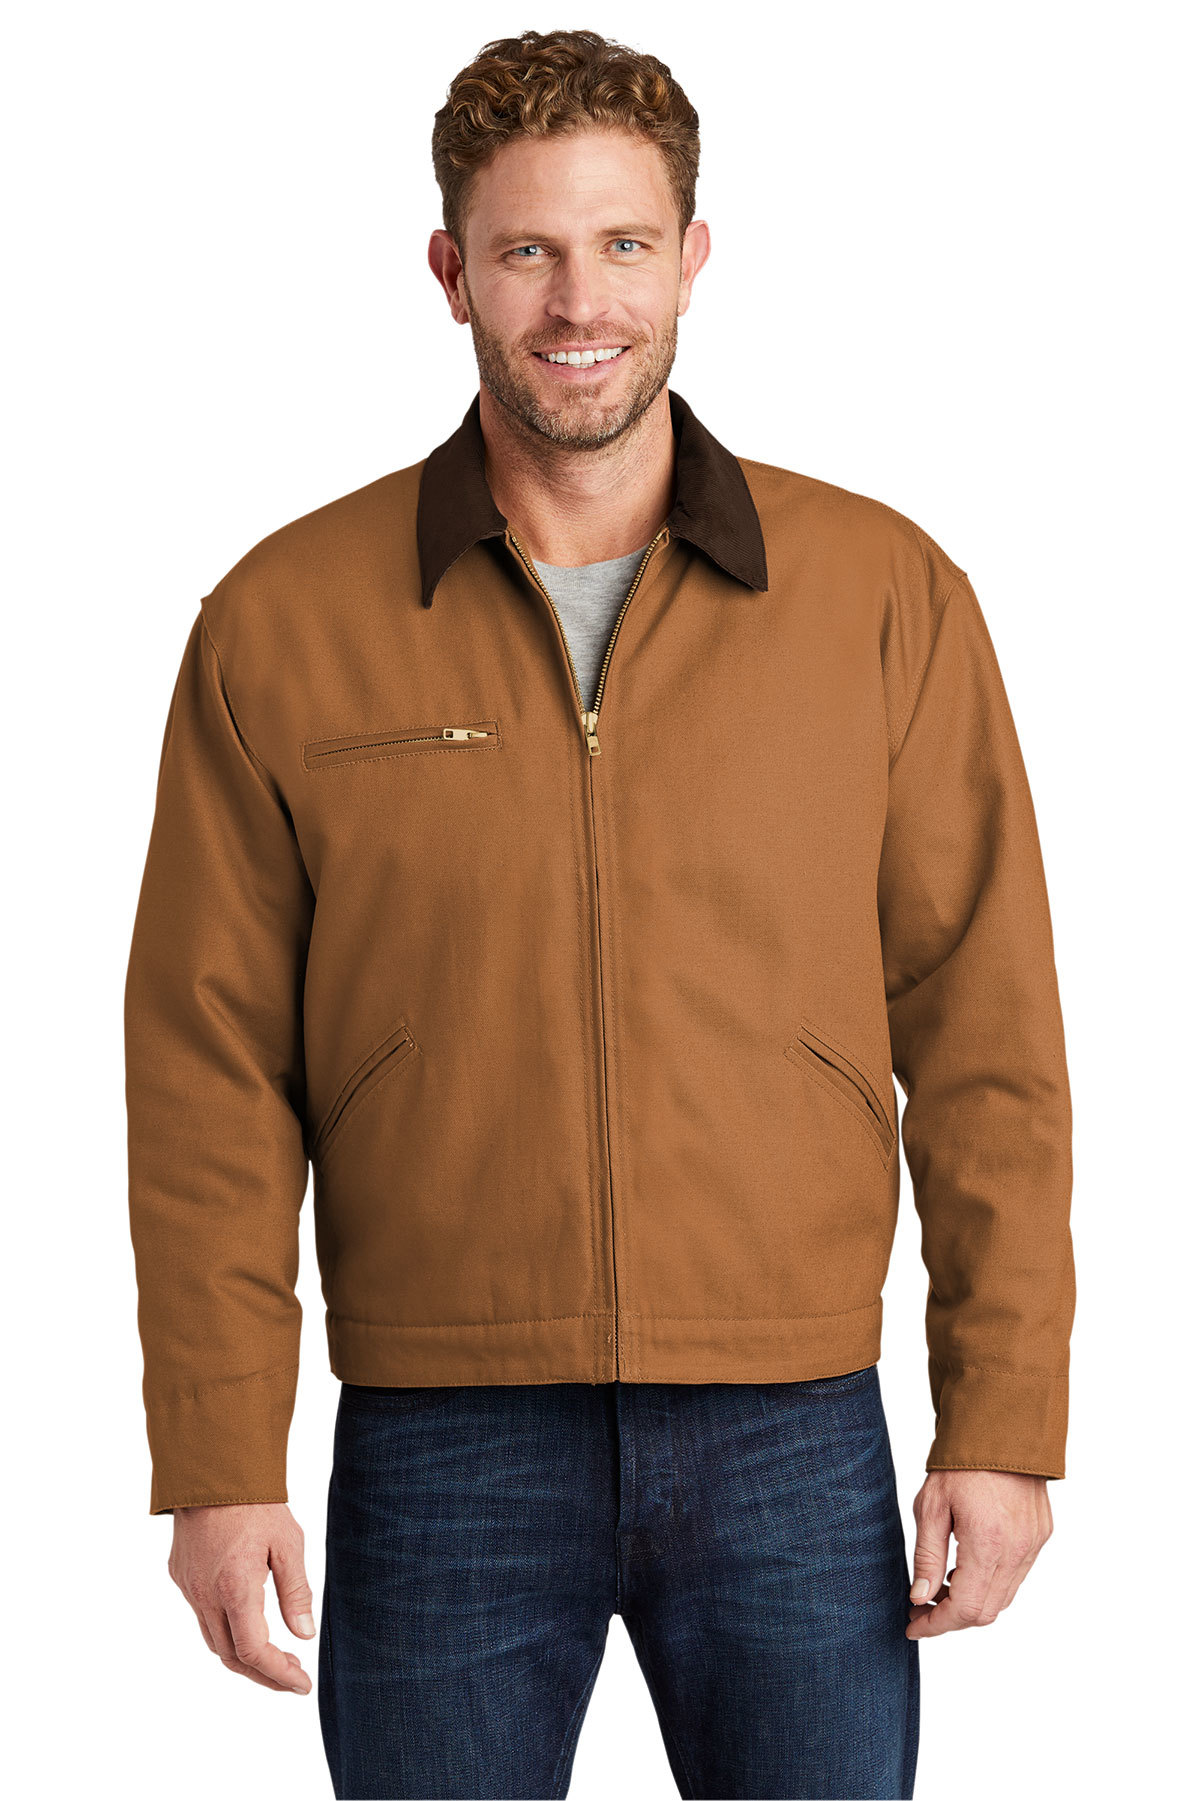 Cornerstone Jackets: Quality, Style, and Durability for Every Adventure缩略图